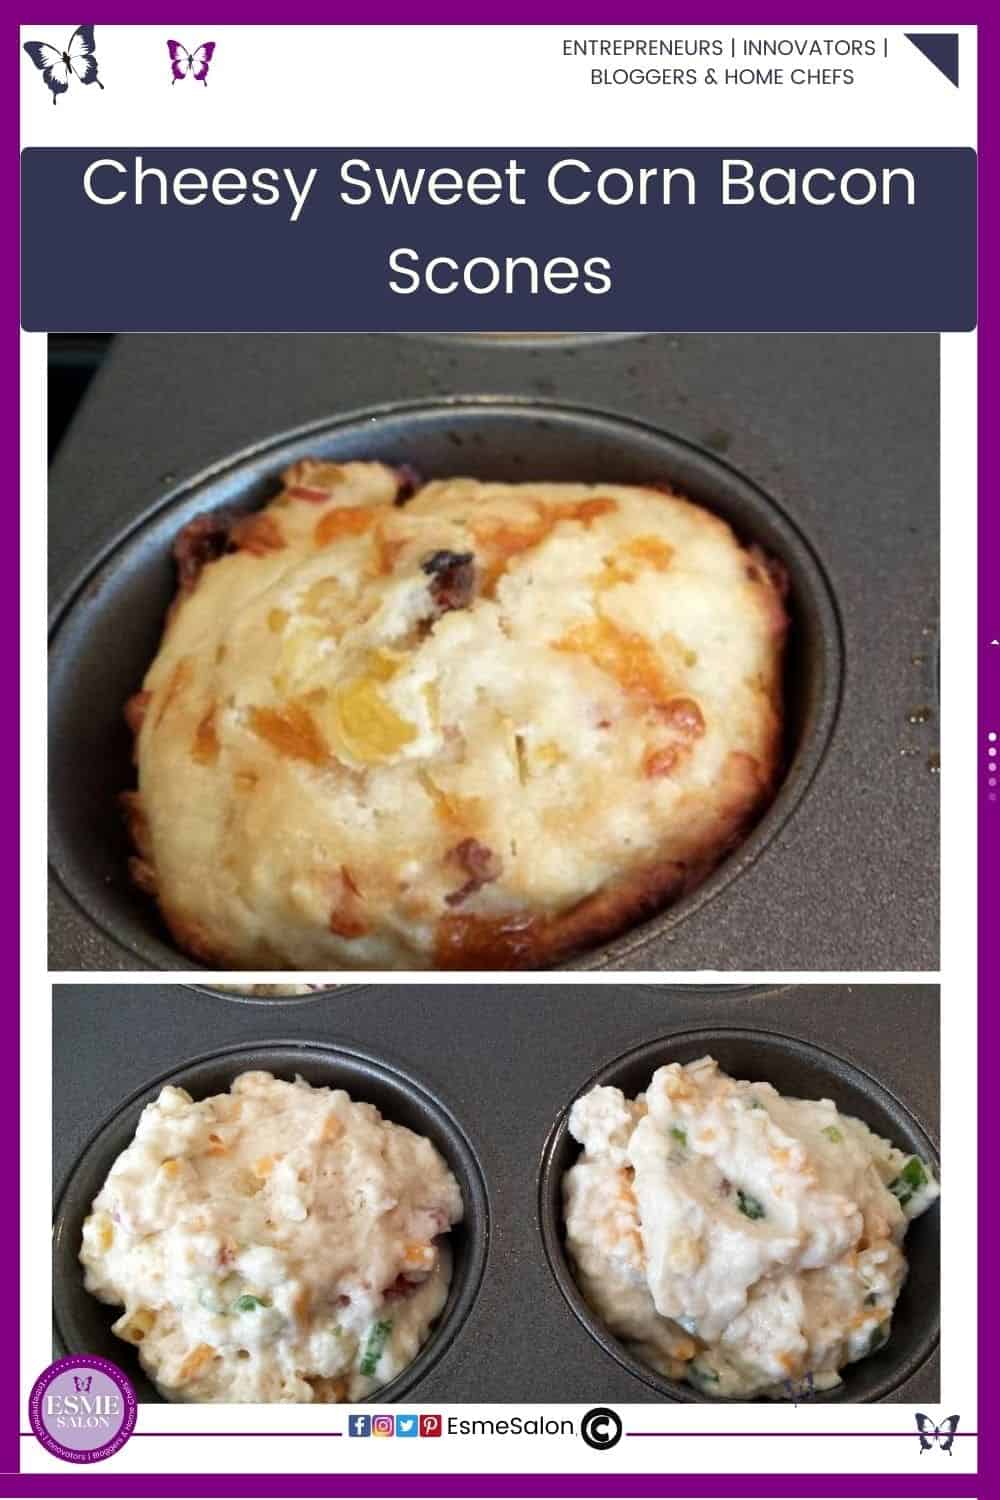 an image of a raw Cheesy Sweet Corn Bacon Scone in a muffin pan as well as one already baked